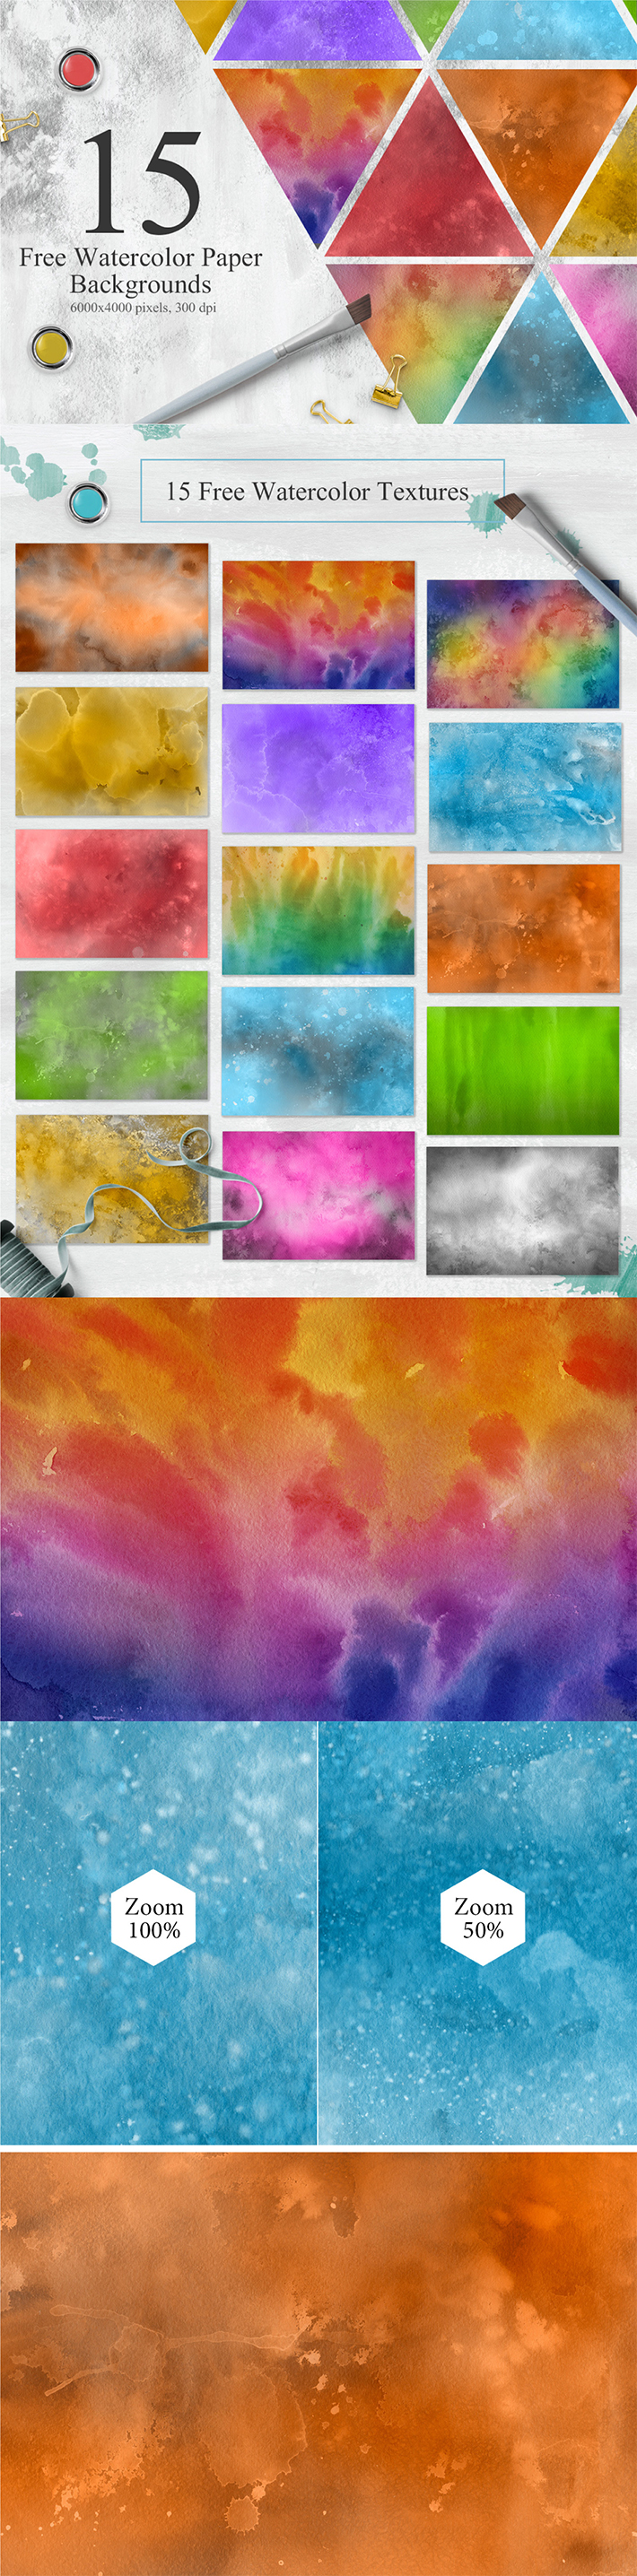 Free Download Awesome 15 Watercolor Colorful Textures For Designers